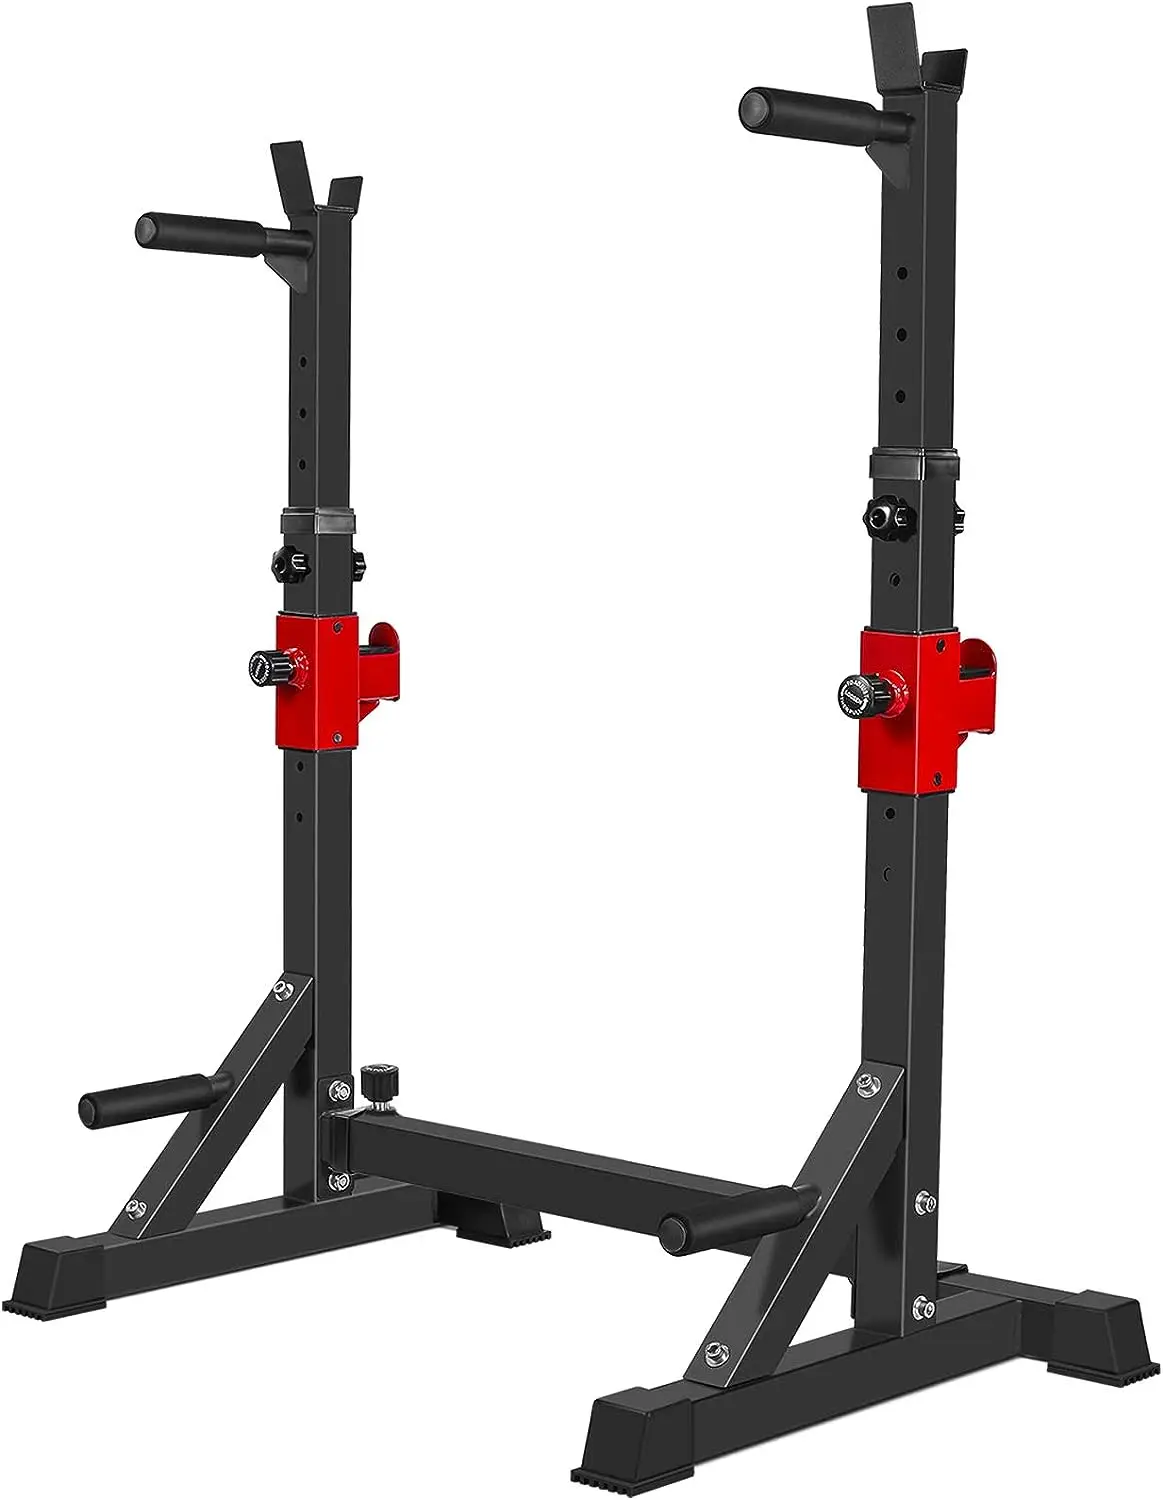 

Squat Stand, Barbell , Dip Bar Station Adjustable Bench Press 850LBS Max Load Multi-Function Weight Lifting Home Gym